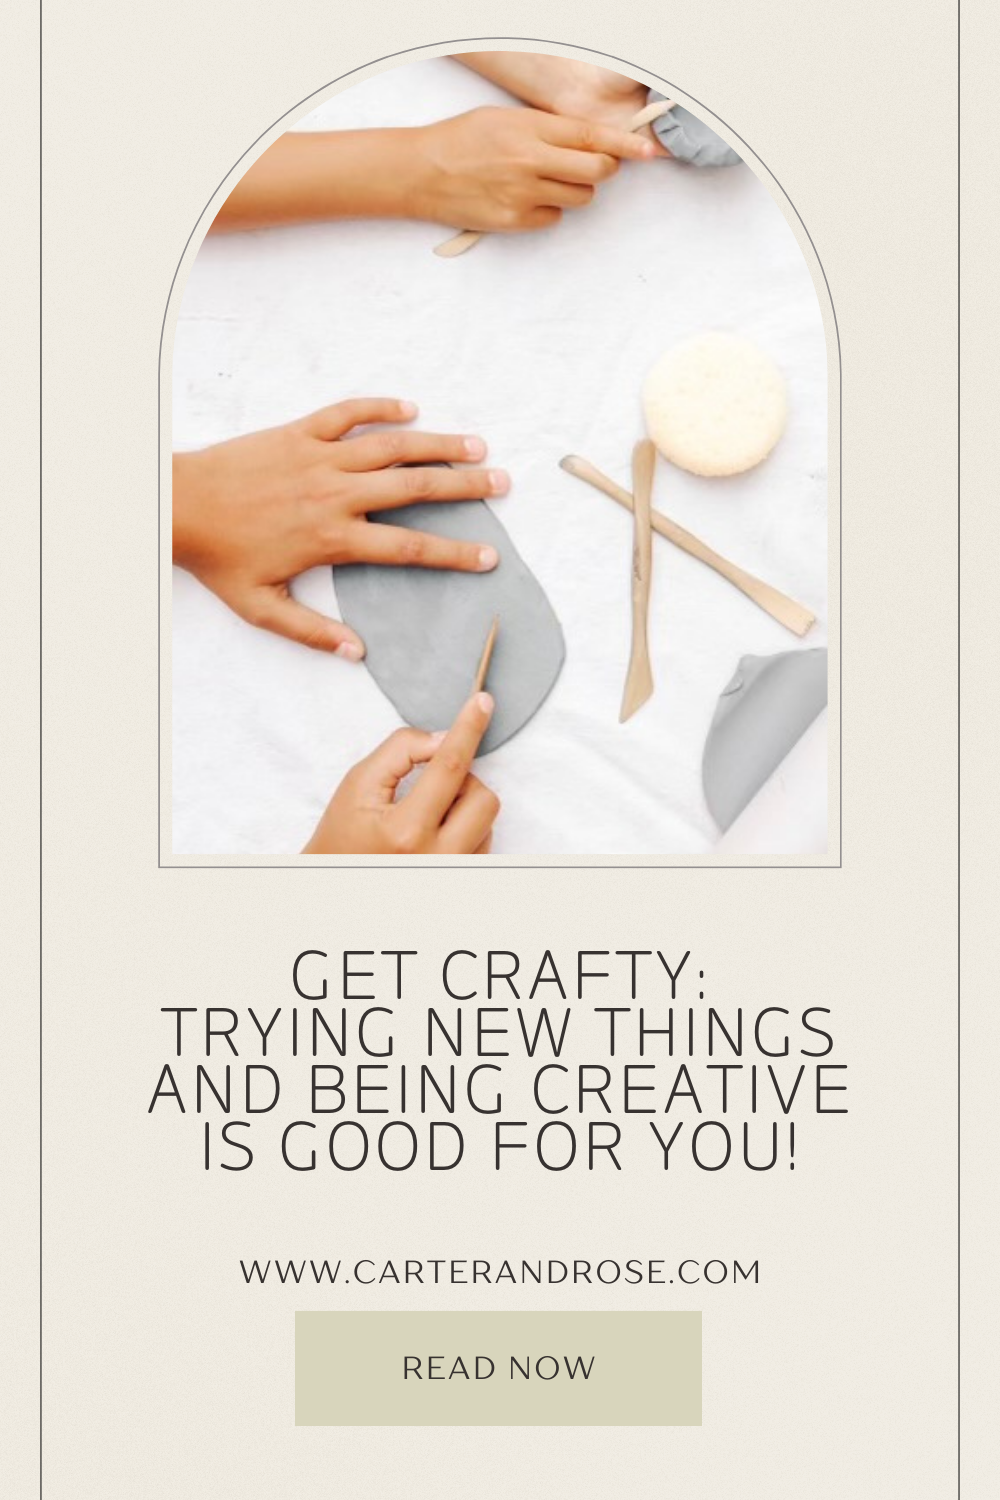 Get Crafty: Trying New Things and Being Creative is Good for You!